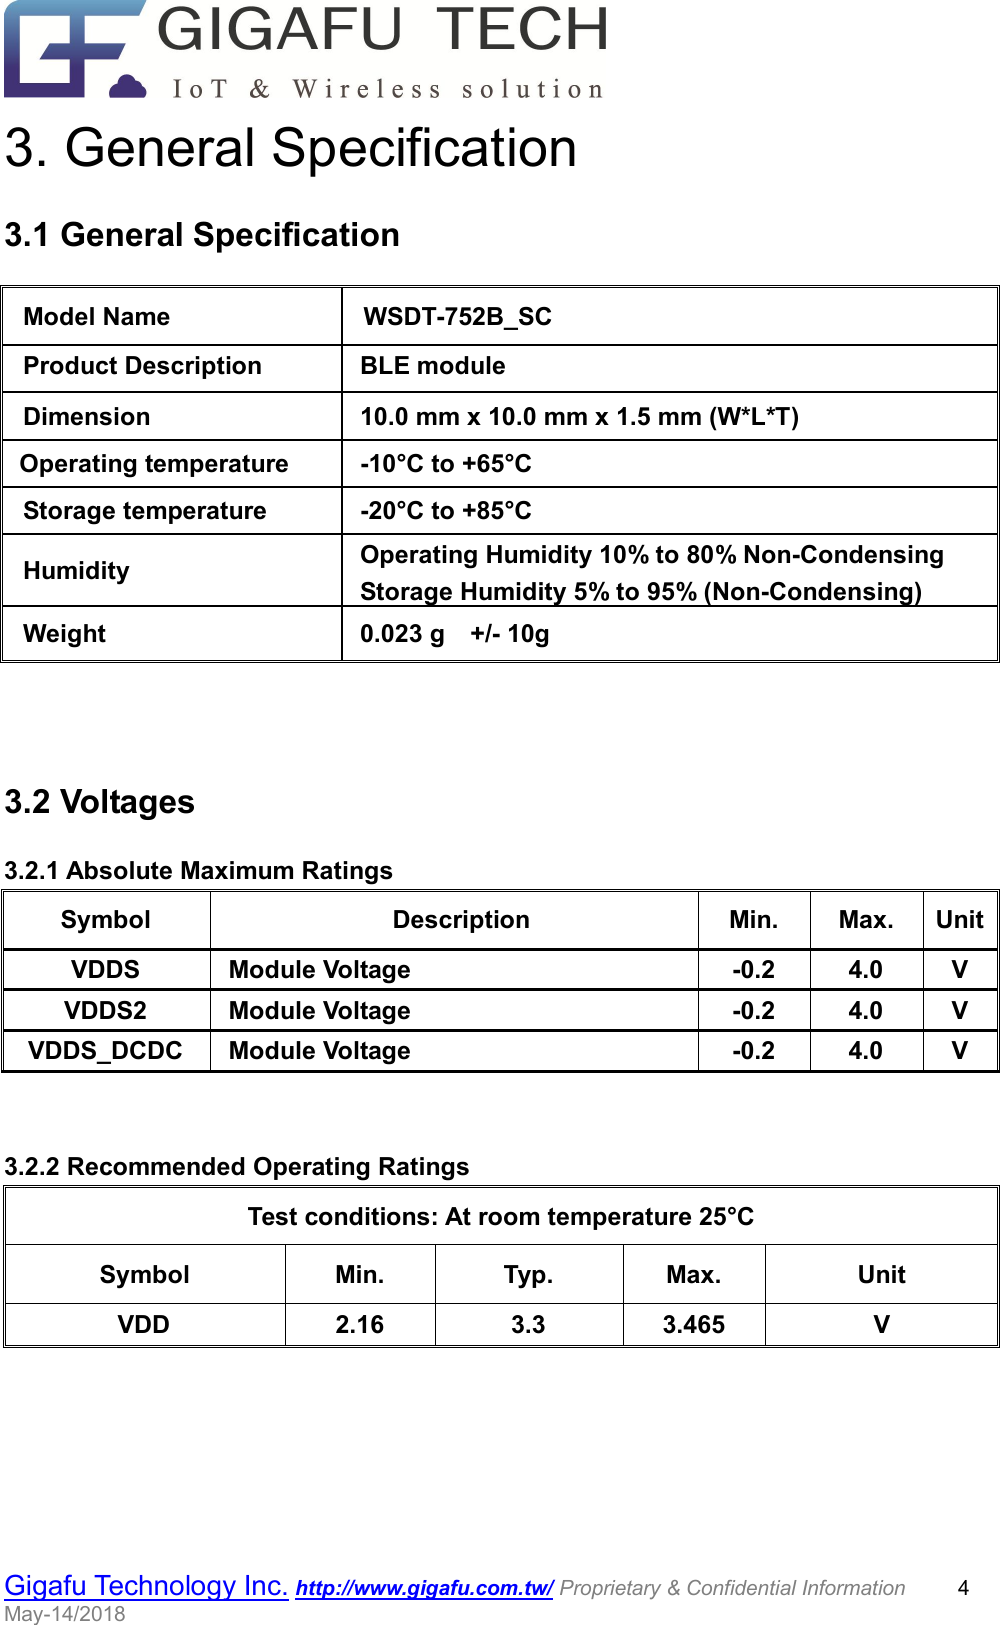                                                  Gigafu Technology Inc. http://www.gigafu.com.tw/ Proprietary &amp; Confidential Information          4 May-14/2018   3. General Specification 3.1 General Specification  3.2 Voltages 3.2.1 Absolute Maximum Ratings Symbol  Description  Min.  Max.  Unit VDDS  Module Voltage  -0.2  4.0  V VDDS2  Module Voltage  -0.2  4.0  V VDDS_DCDC  Module Voltage  -0.2  4.0  V   3.2.2 Recommended Operating Ratings Test conditions: At room temperature 25°C   Symbol  Min.  Typ.  Max.  Unit VDD  2.16  3.3  3.465  V Model Name  WSDT-752B_SC Product Description    BLE module Dimension  10.0 mm x 10.0 mm x 1.5 mm (W*L*T)   Operating temperature  -10°C to +65°C Storage temperature  -20°C to +85°C Humidity  Operating Humidity 10% to 80% Non-Condensing   Storage Humidity 5% to 95% (Non-Condensing) Weight  0.023 g    +/- 10g 